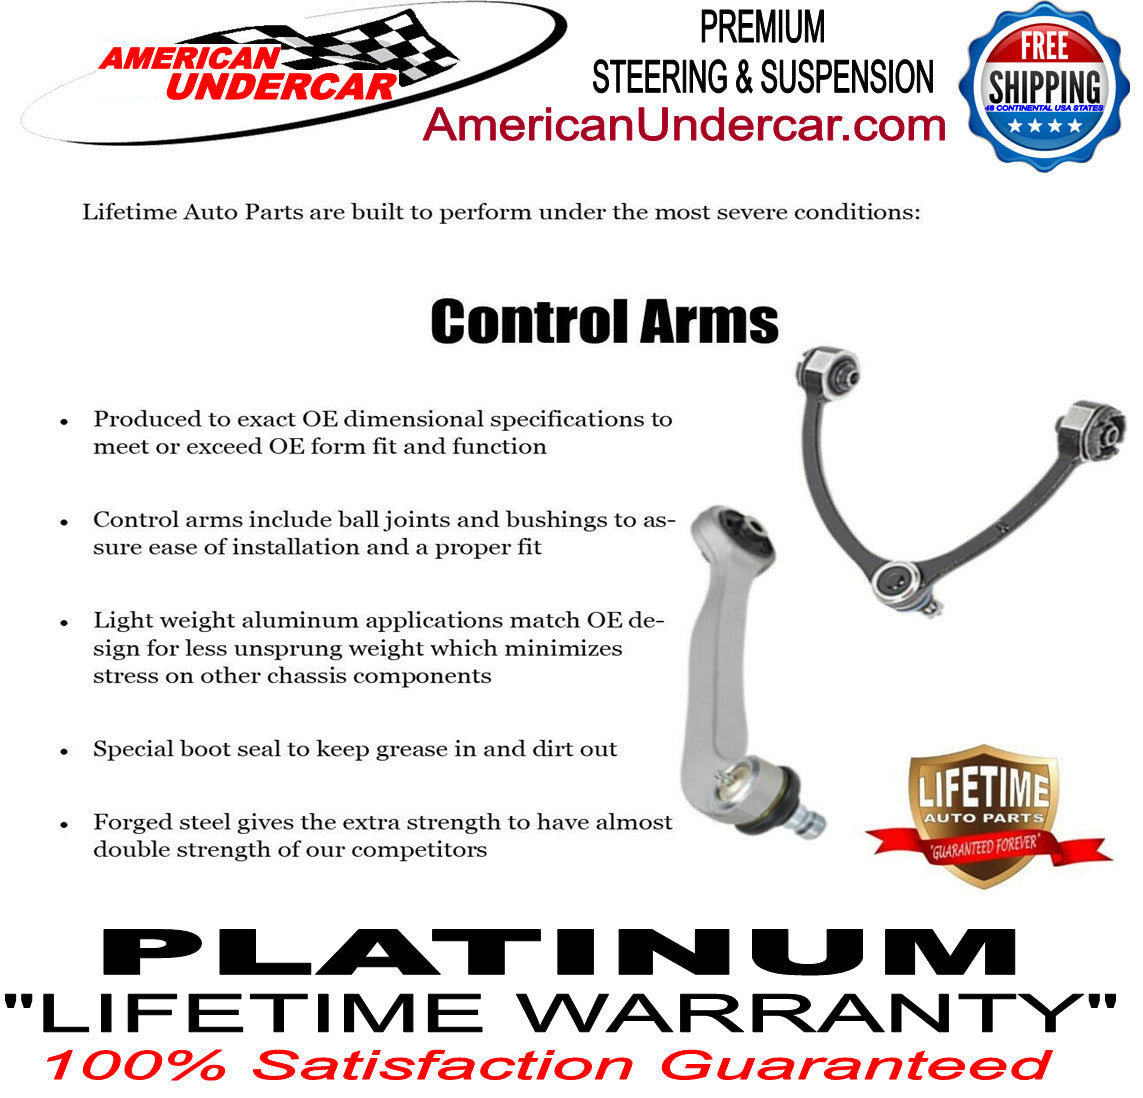 Lifetime Control Arm Ball Joint Suspension Kit for 2014-2018 Cadillac, Chevrolet, GMC